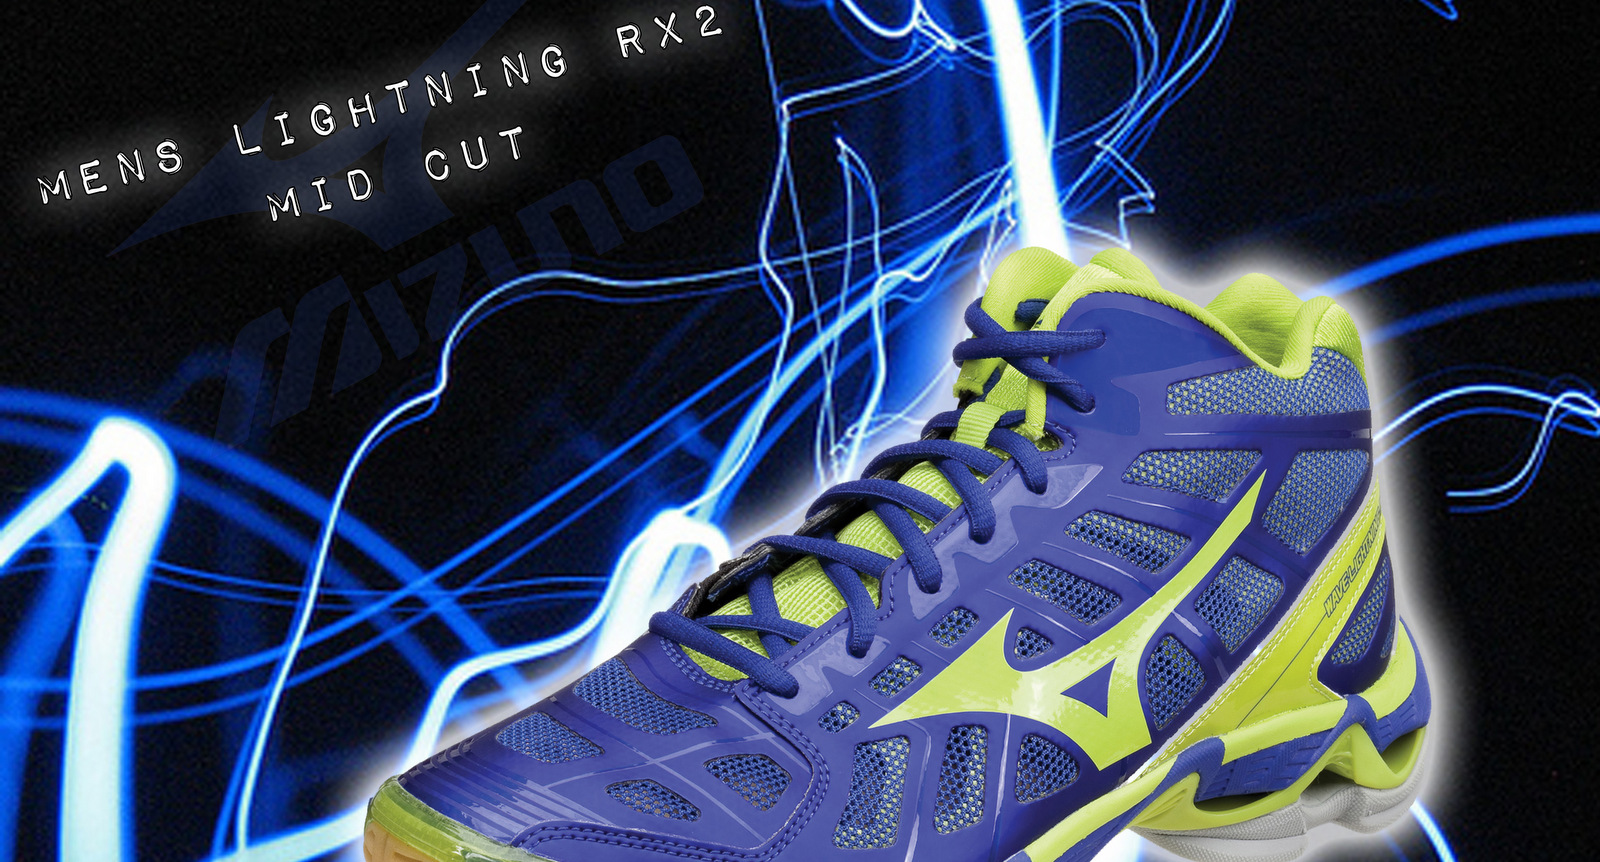 mizuno mid cut volleyball shoes